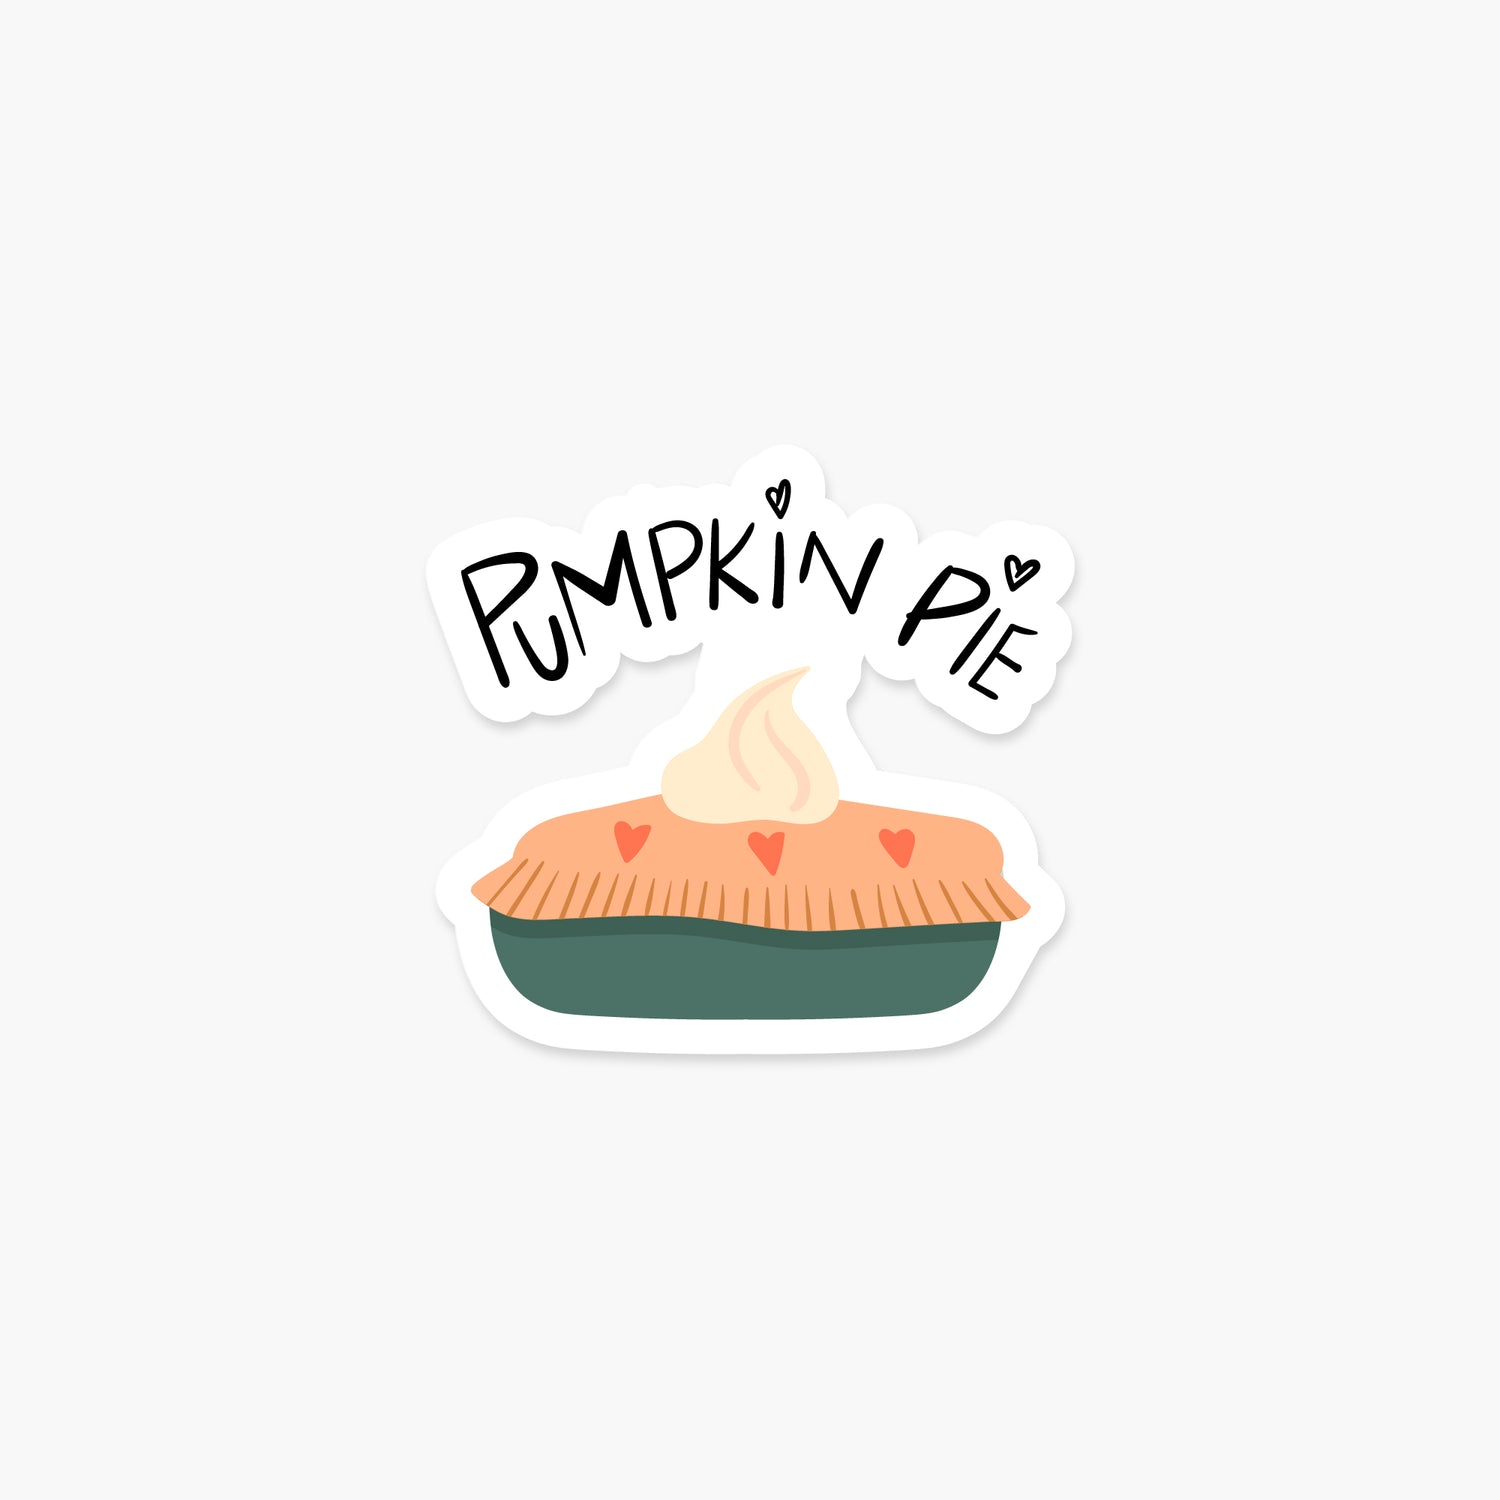 Pumpkin Pie with hearts - Fall & Autumn Sticker | Footnotes Paper